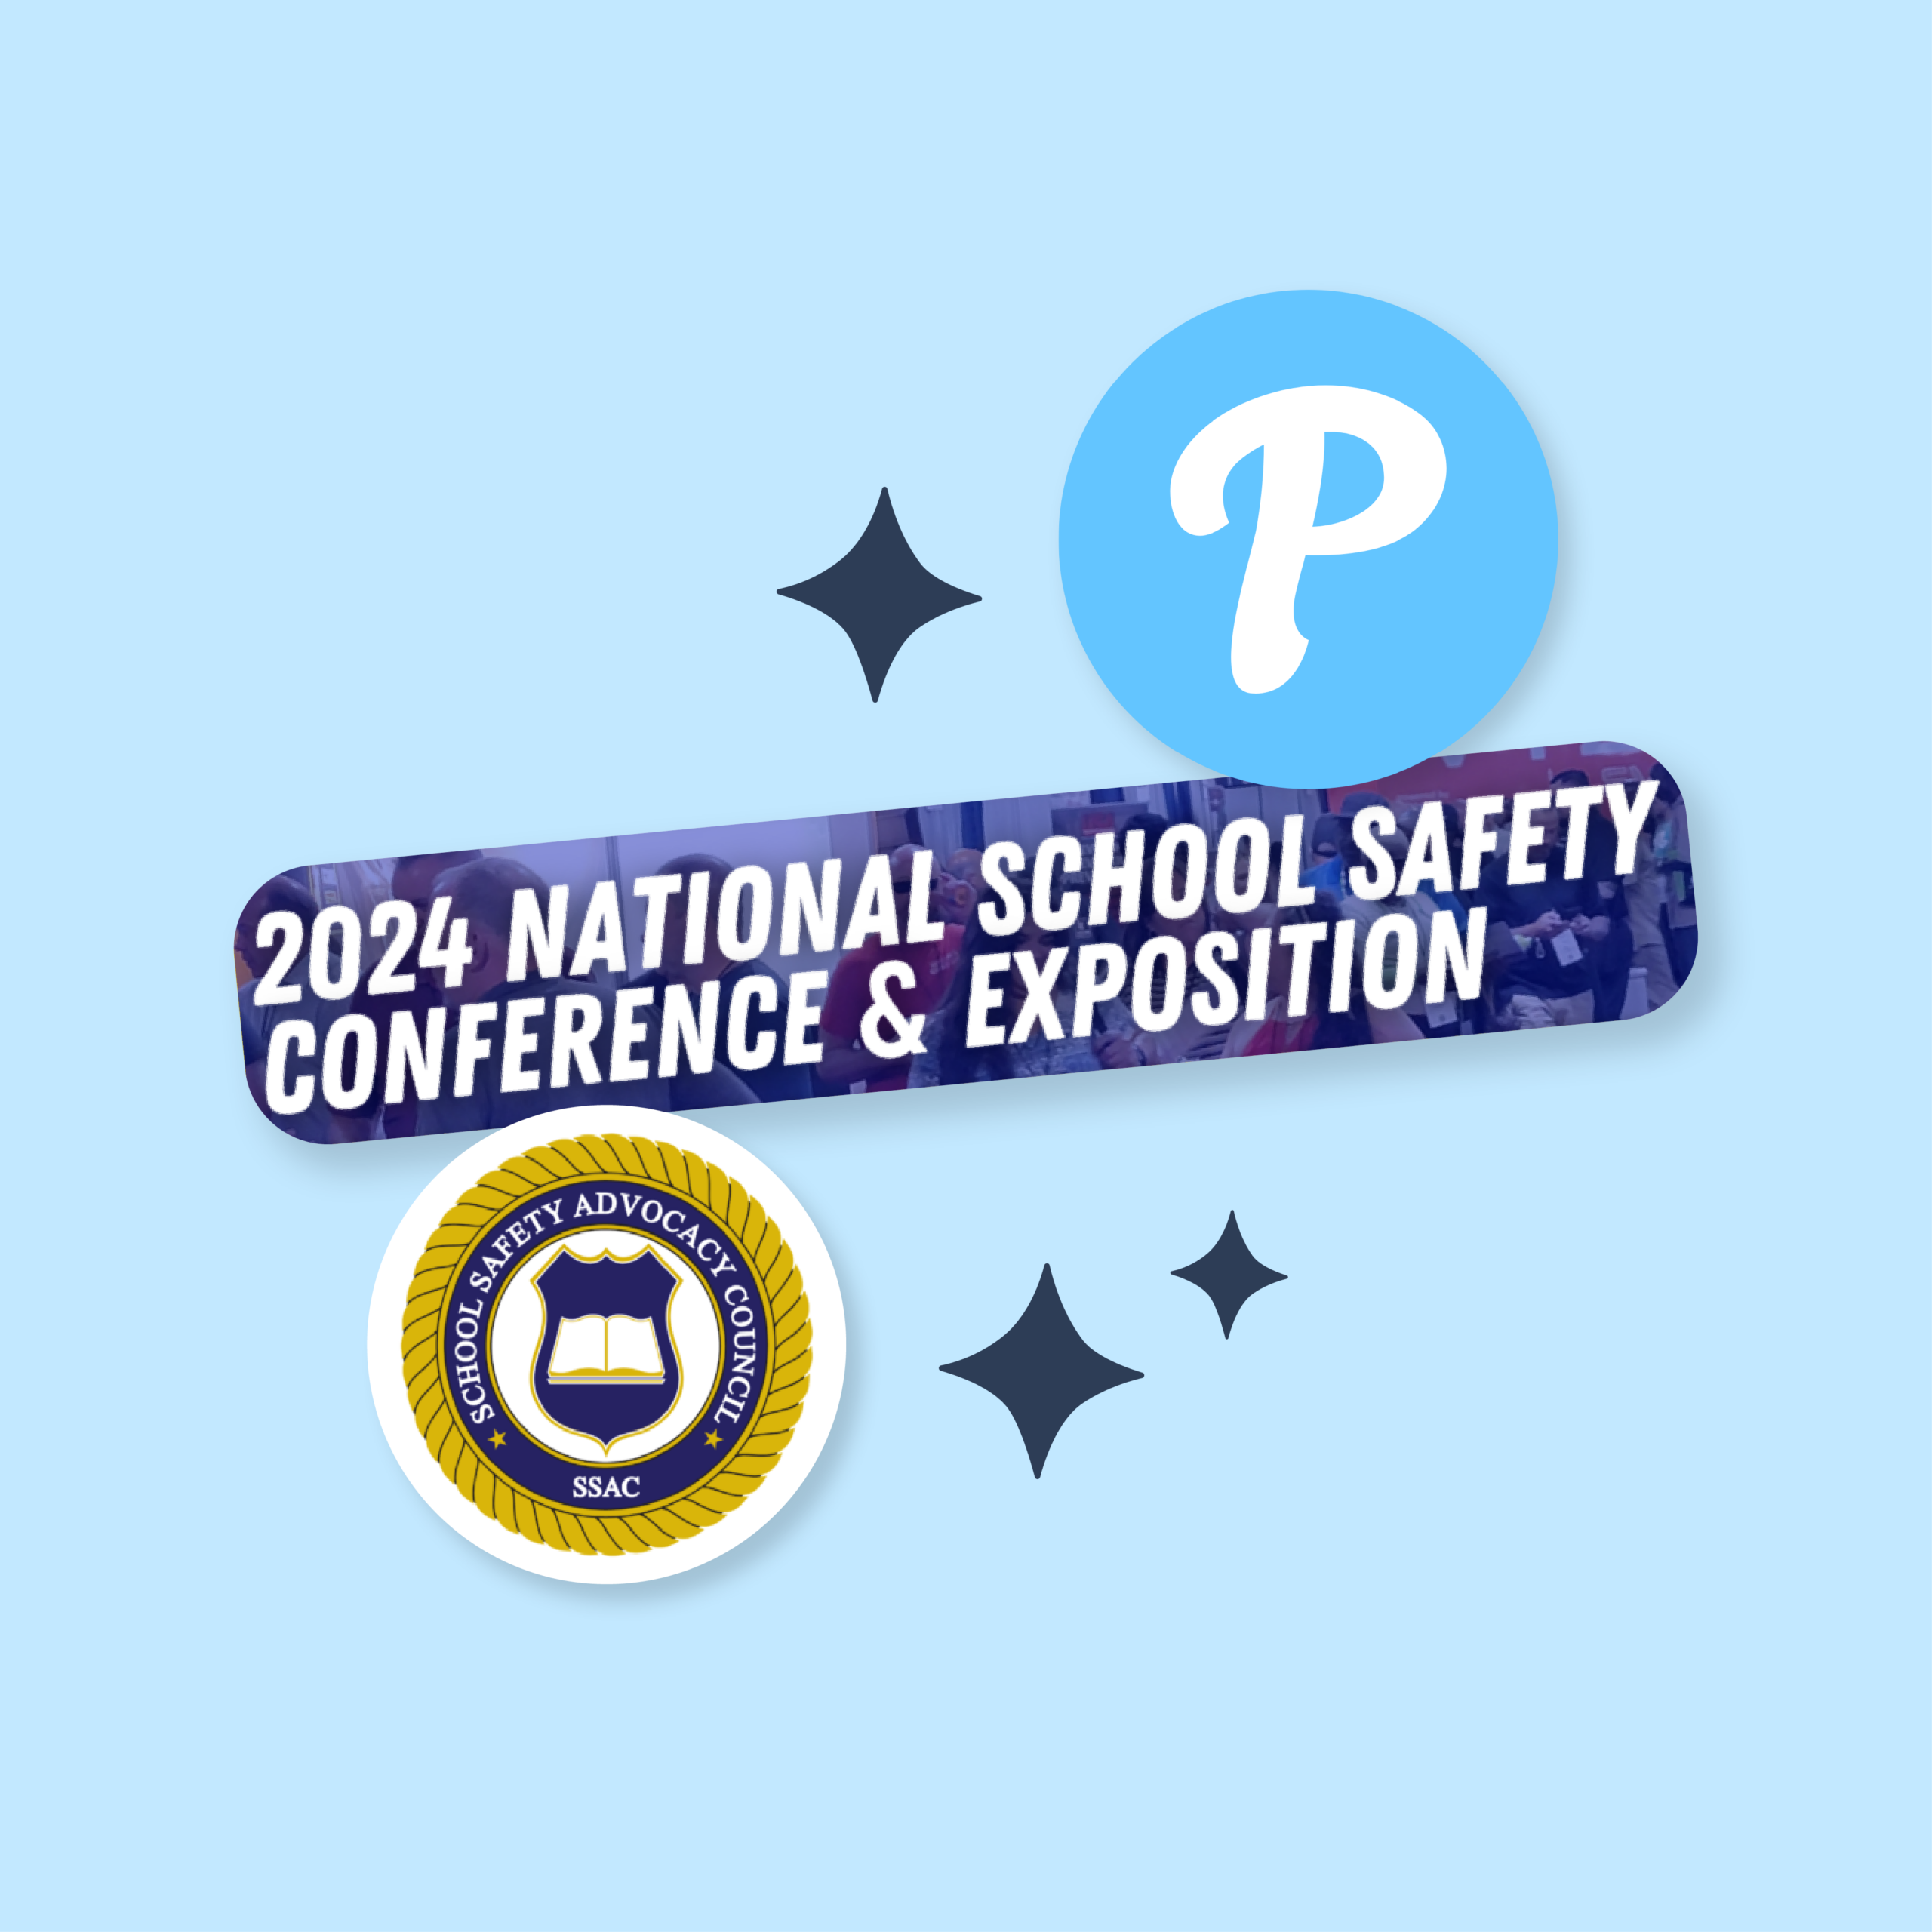 National School Safety Conference & Exposition 2024 Logo